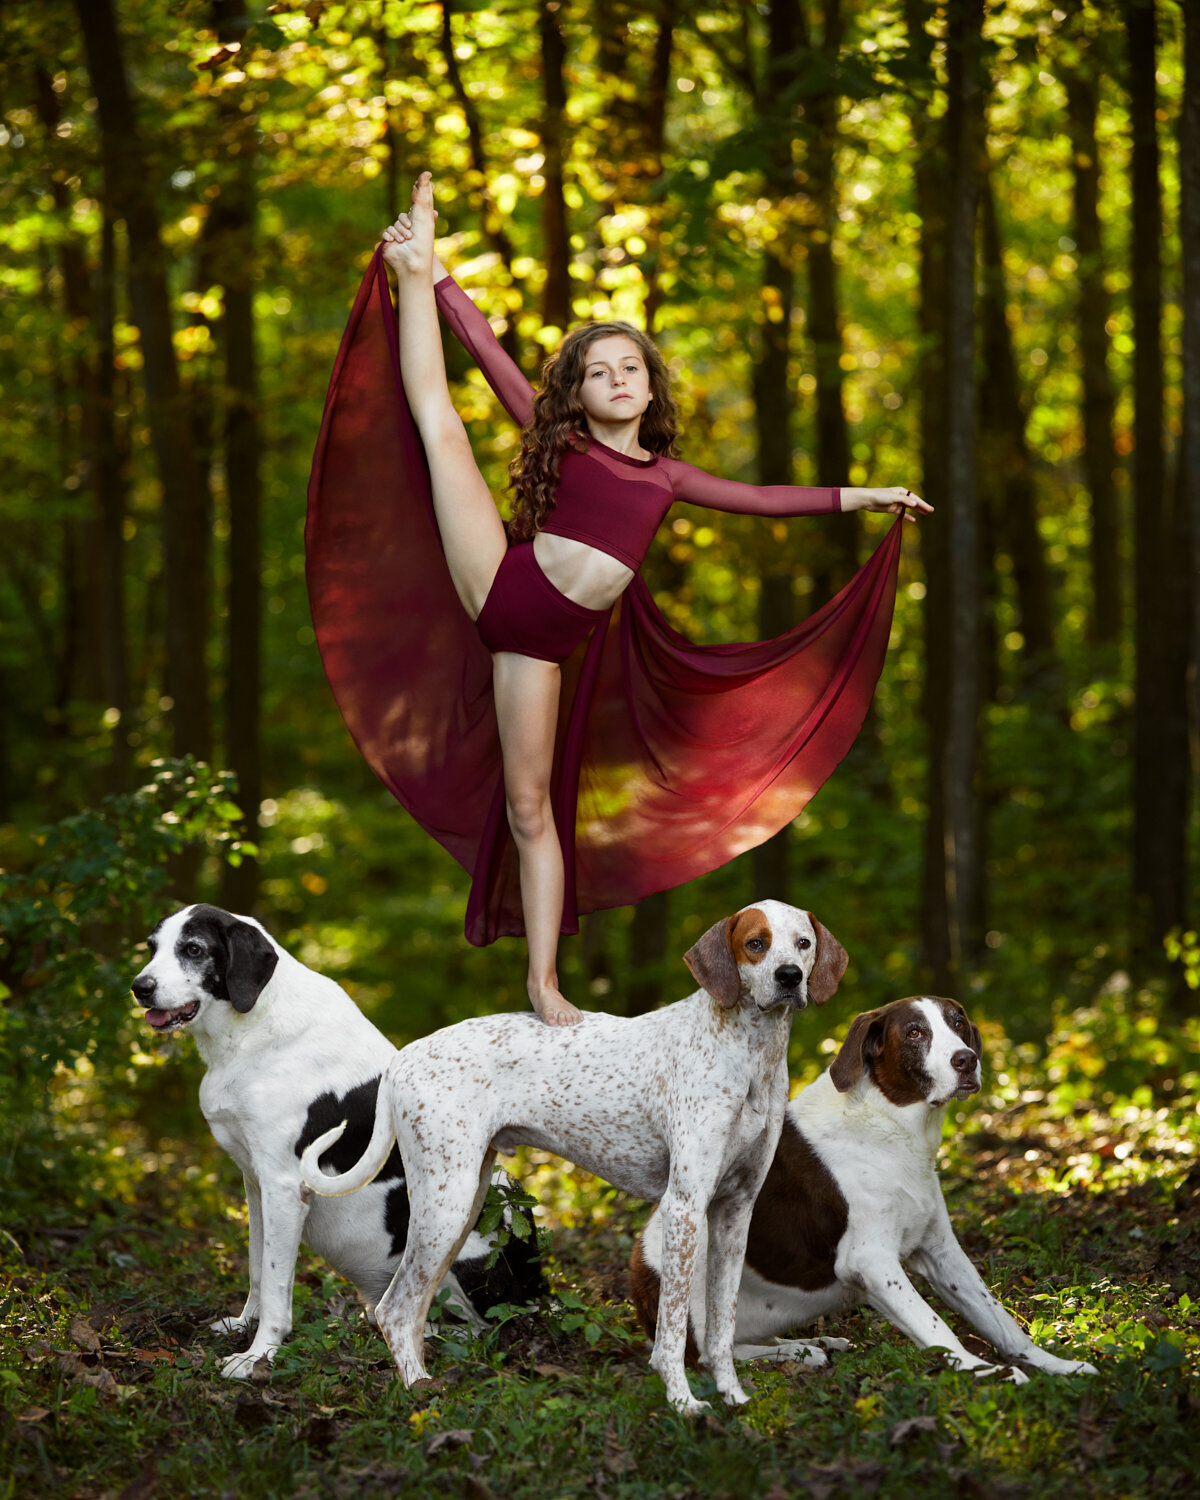 whimsical portrait of little girl dancing on her dog in the woods by portrait photographer Hanna Agar